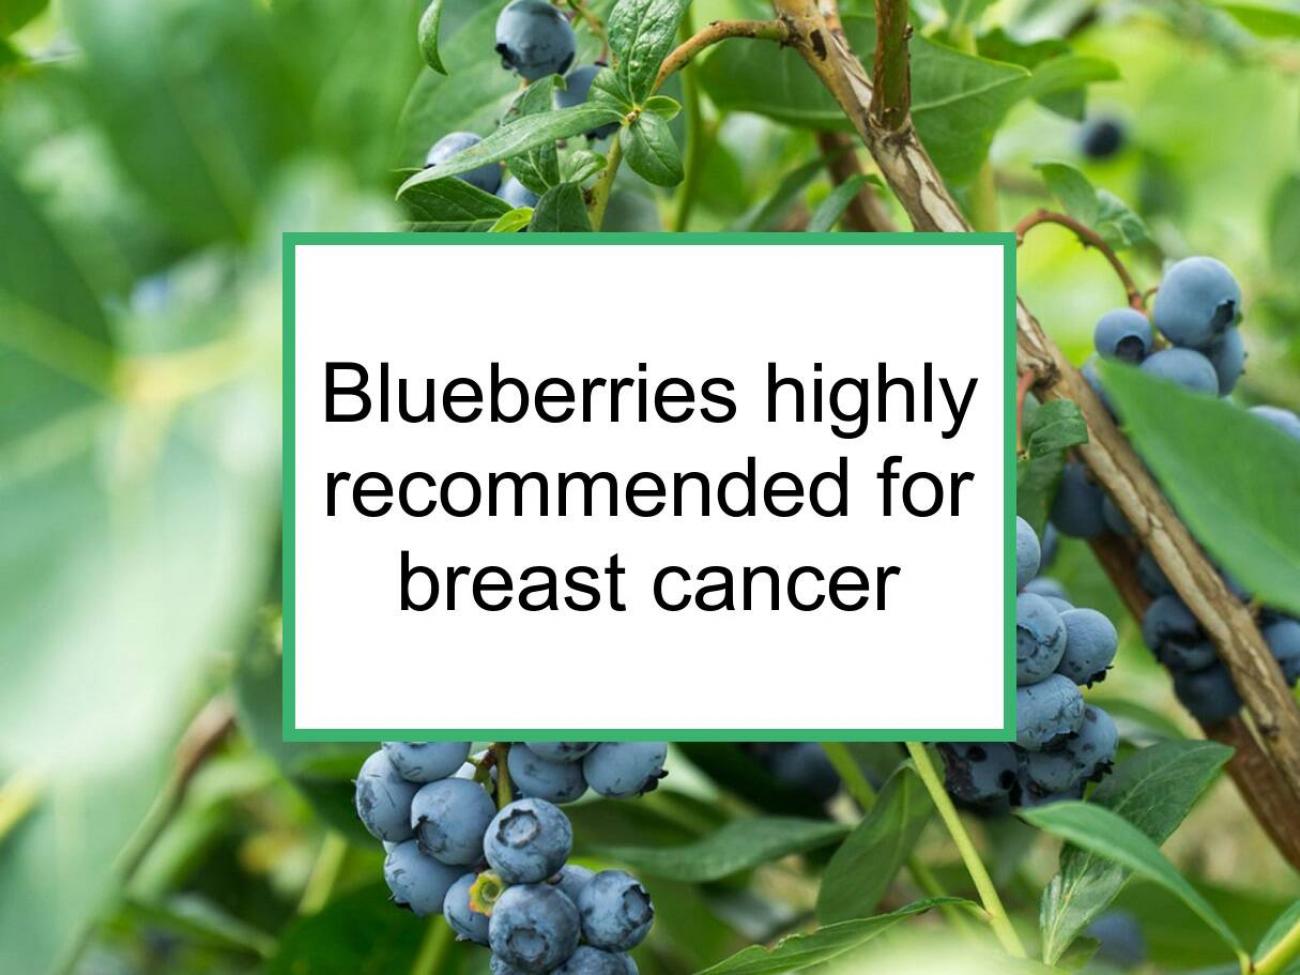 Blueberries Are Highly Recommended For Breast Cancer | Food for Breast Cancer